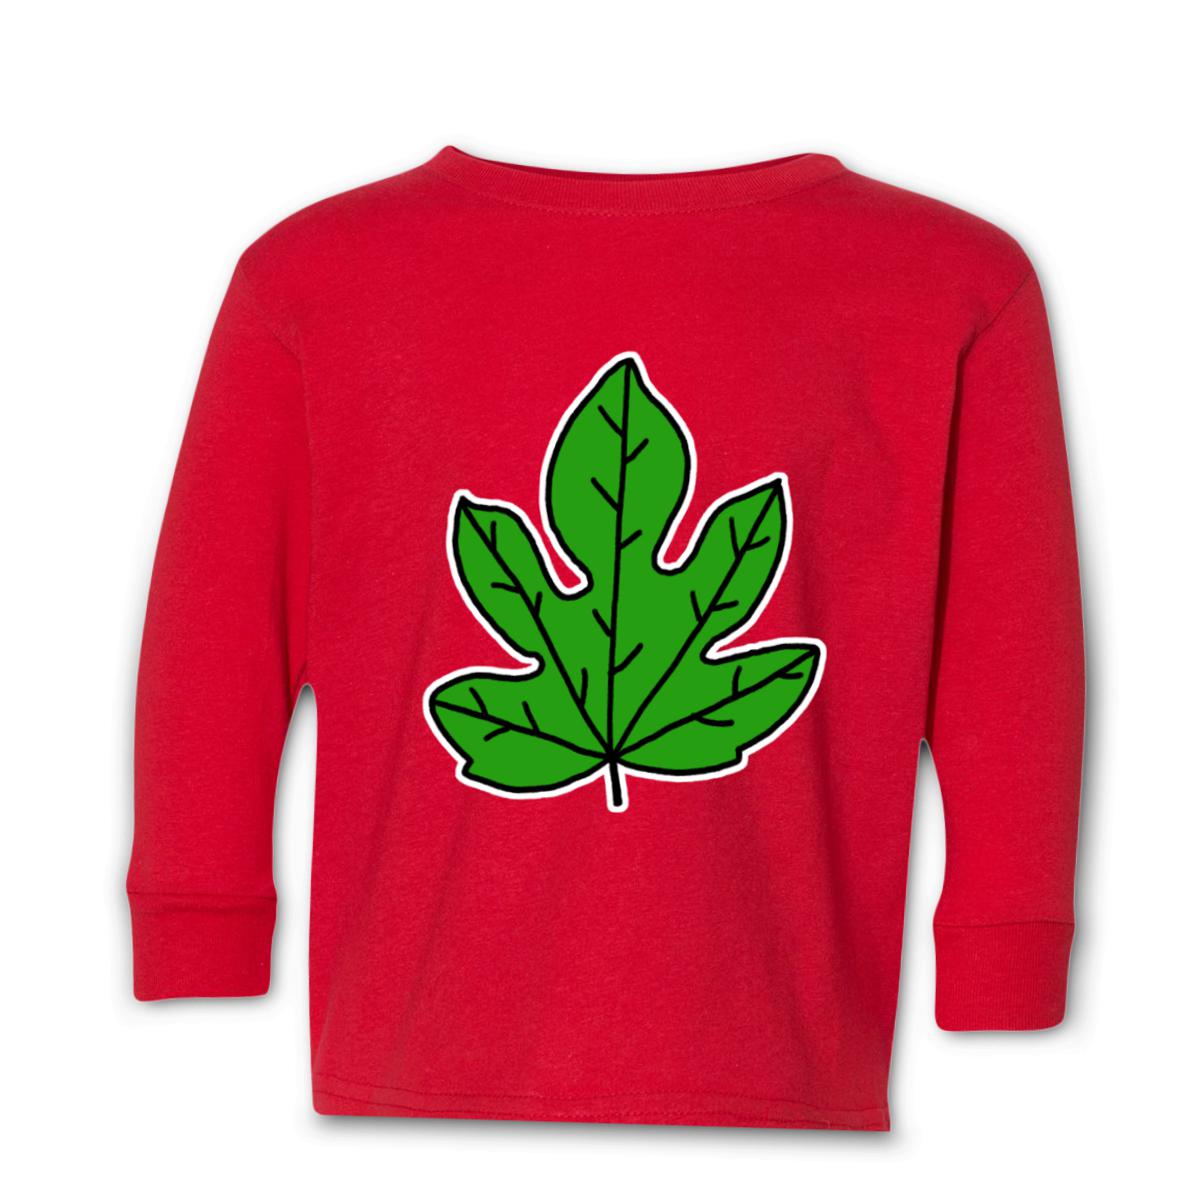 Fig Leaf Toddler Long Sleeve Tee 4T red